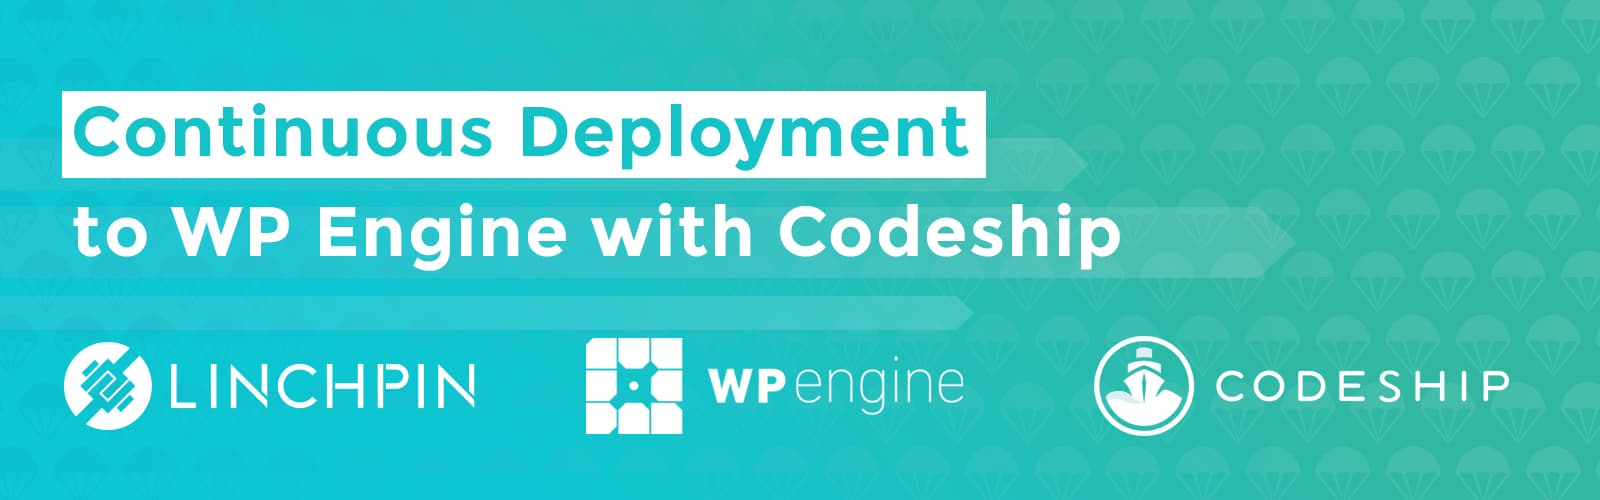 Continuous Deployment to WP Engine with Codeship